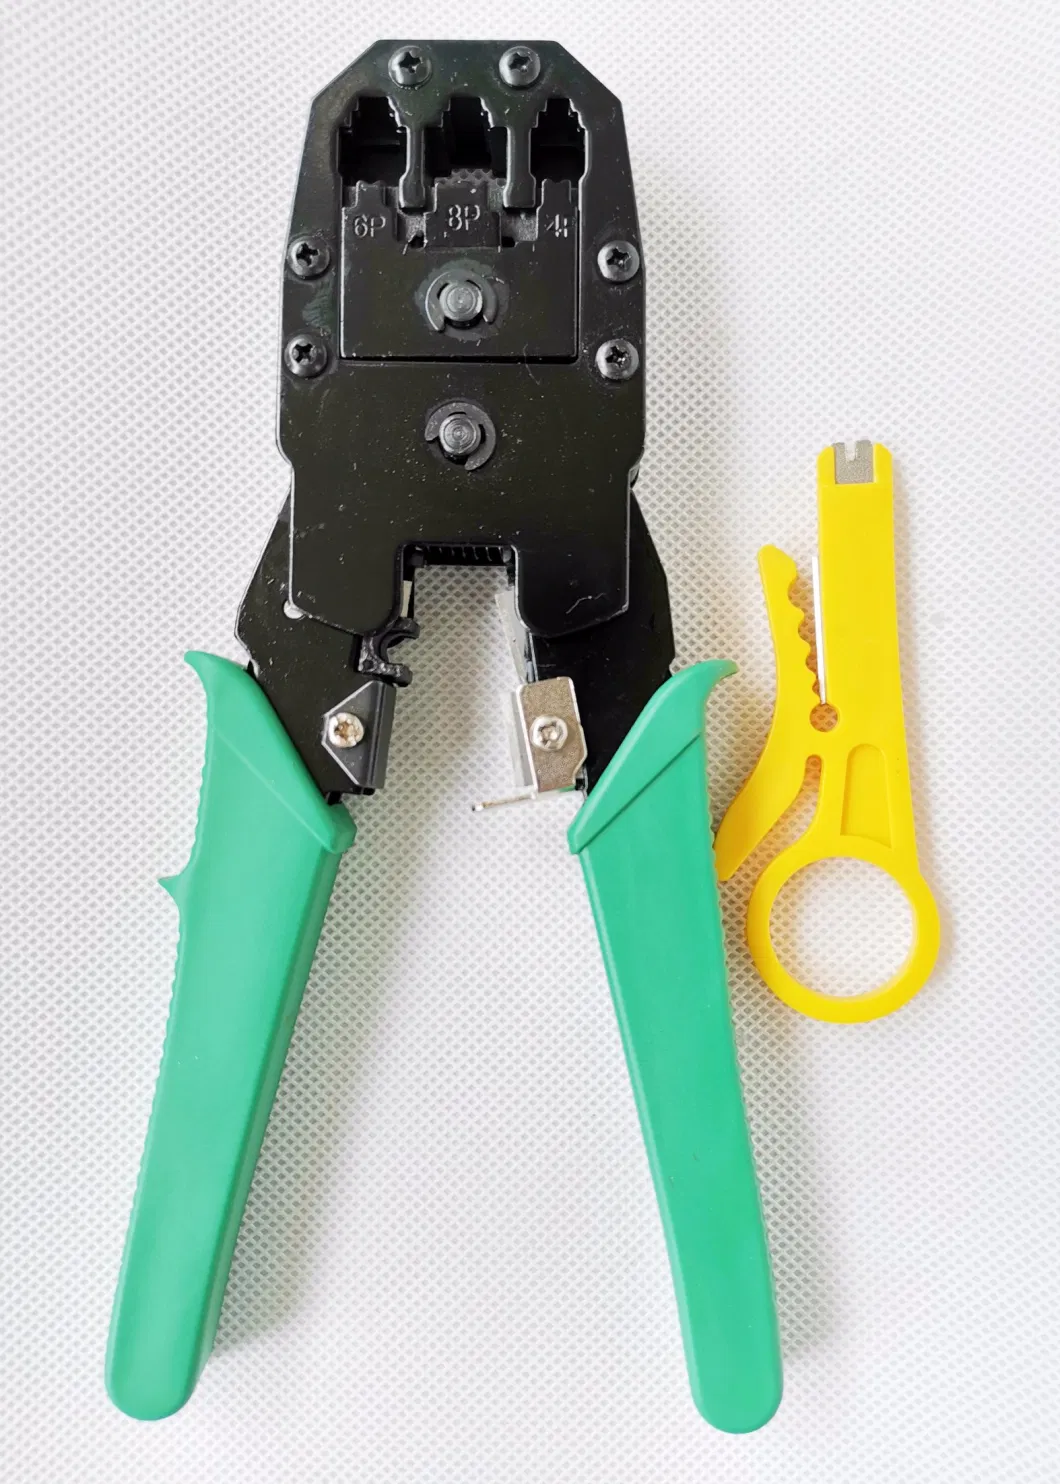 3 in 1 Networking Wire Stripping Network Tool Modualr RJ45 Crimper Tool